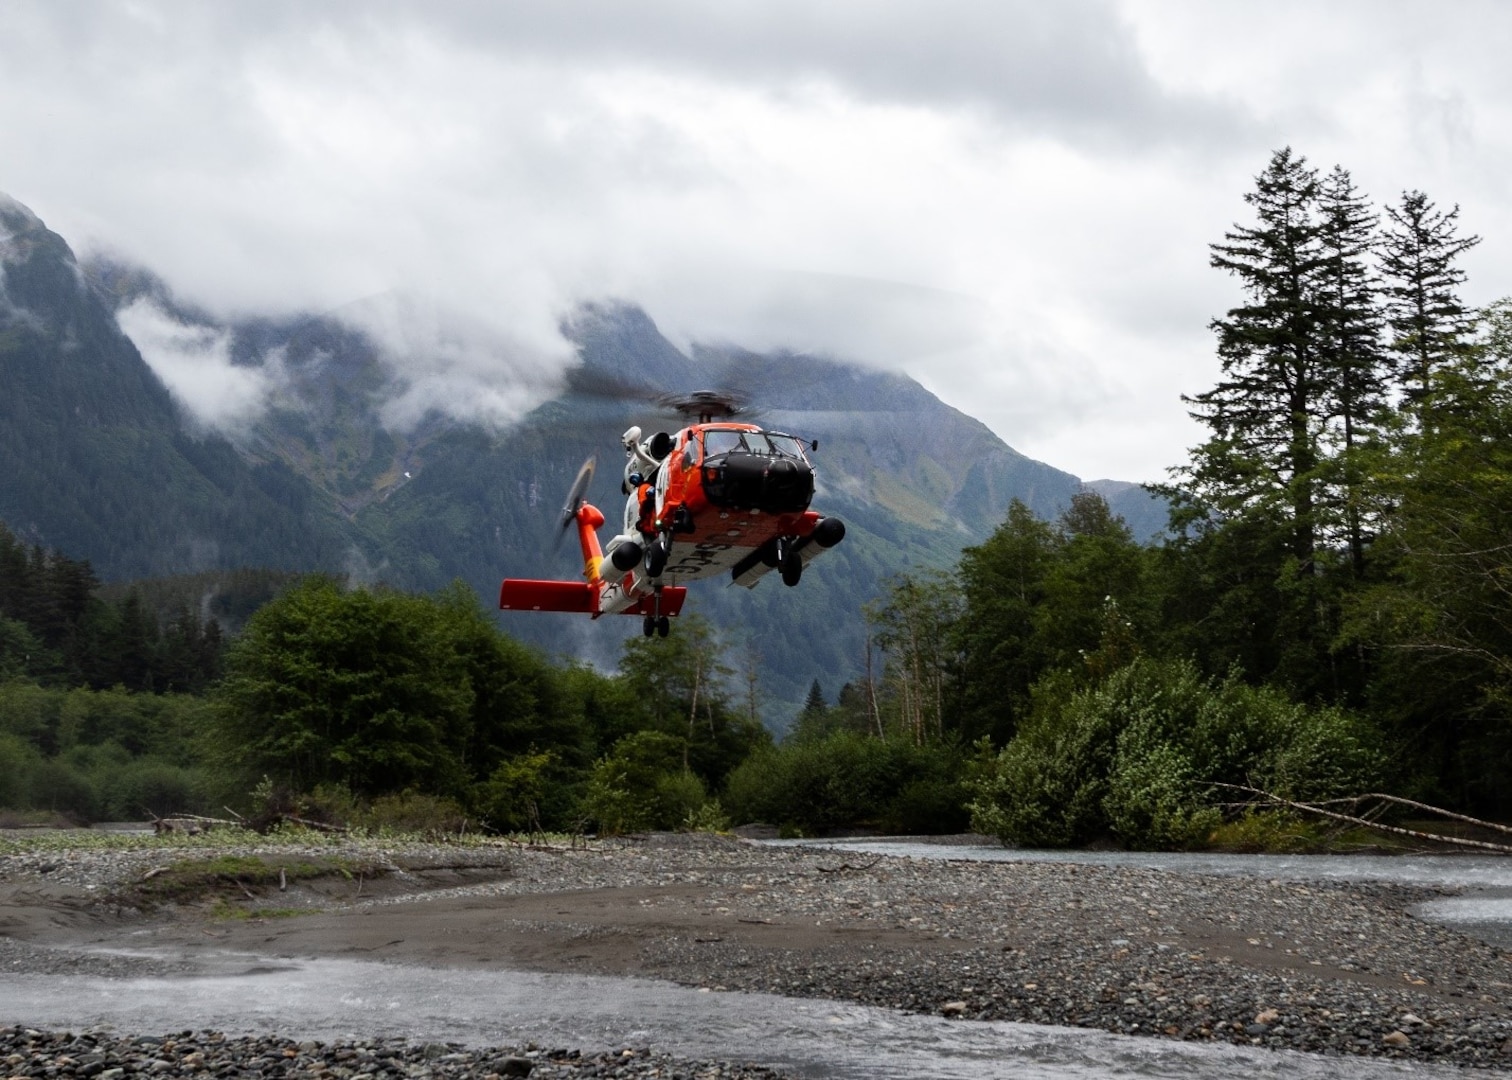 A U.S. Coast Guard MH-60 Jayhawk touches down in Alaskan wilderness during regular training exercises. (U.S. Coast Guard Air Station Sitka photo)